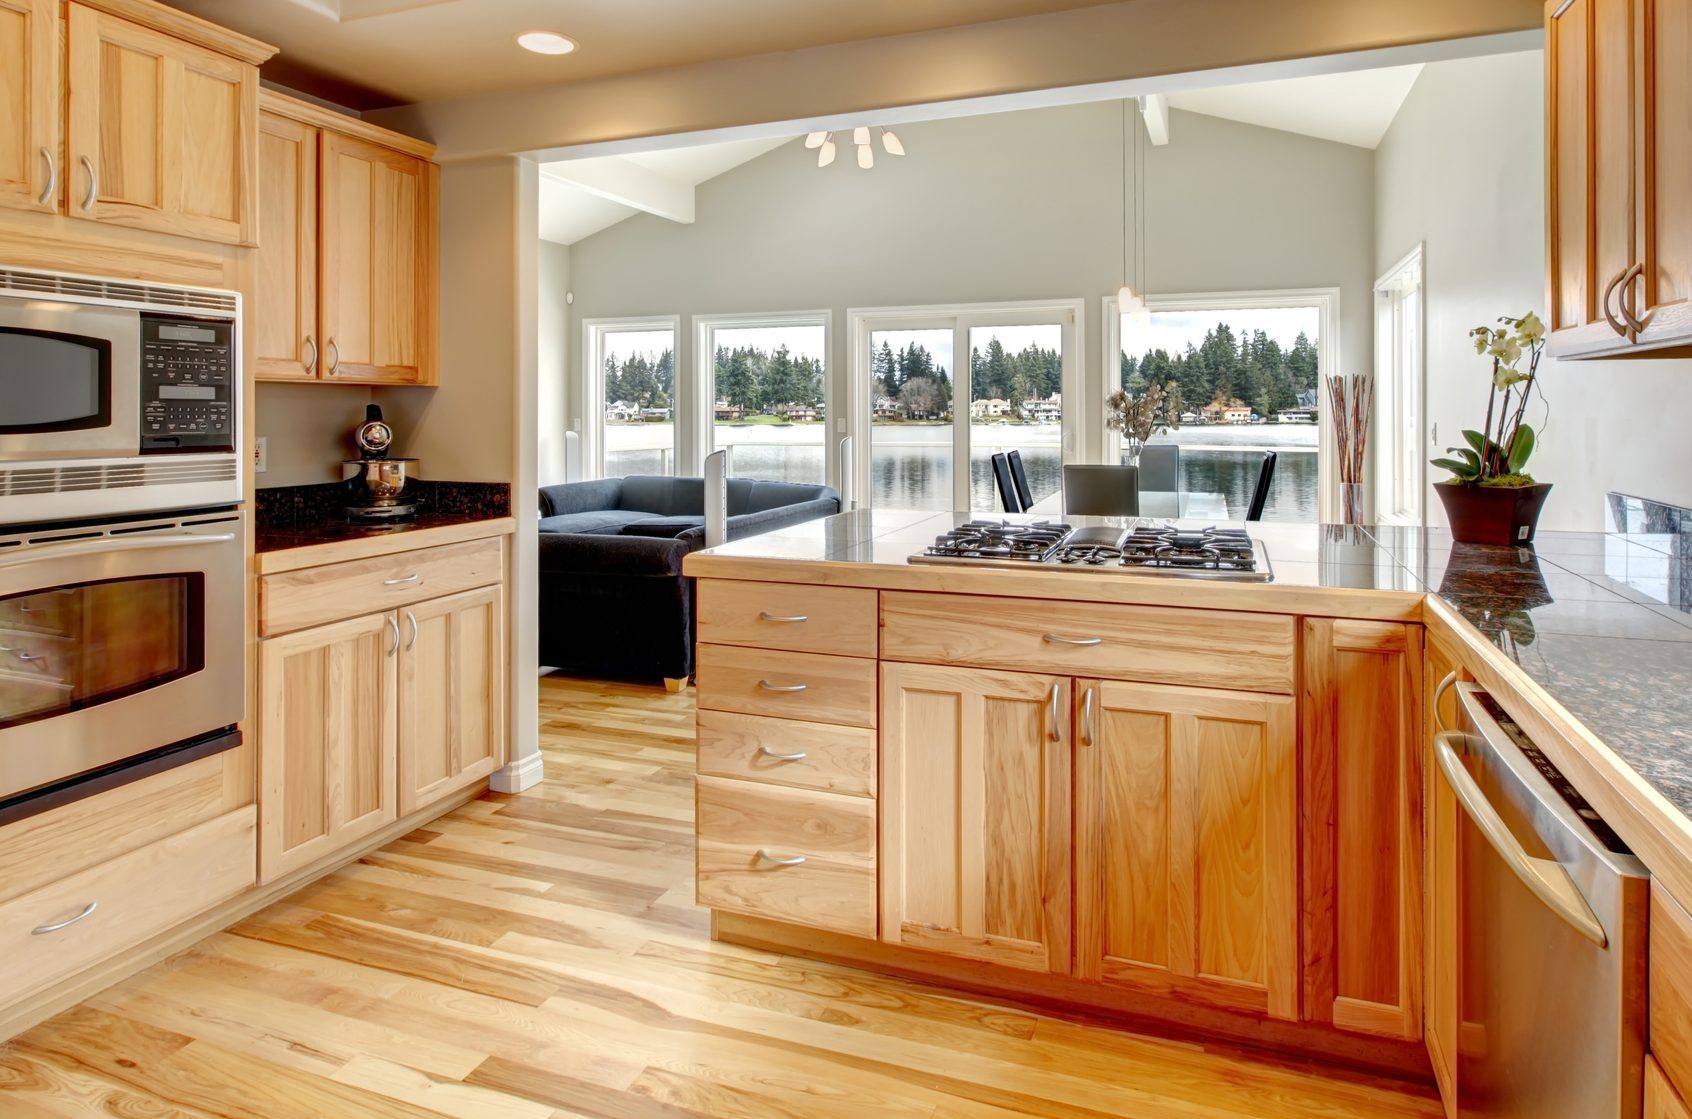 Bright wood kitchen with hickory hardwood floors and dining area